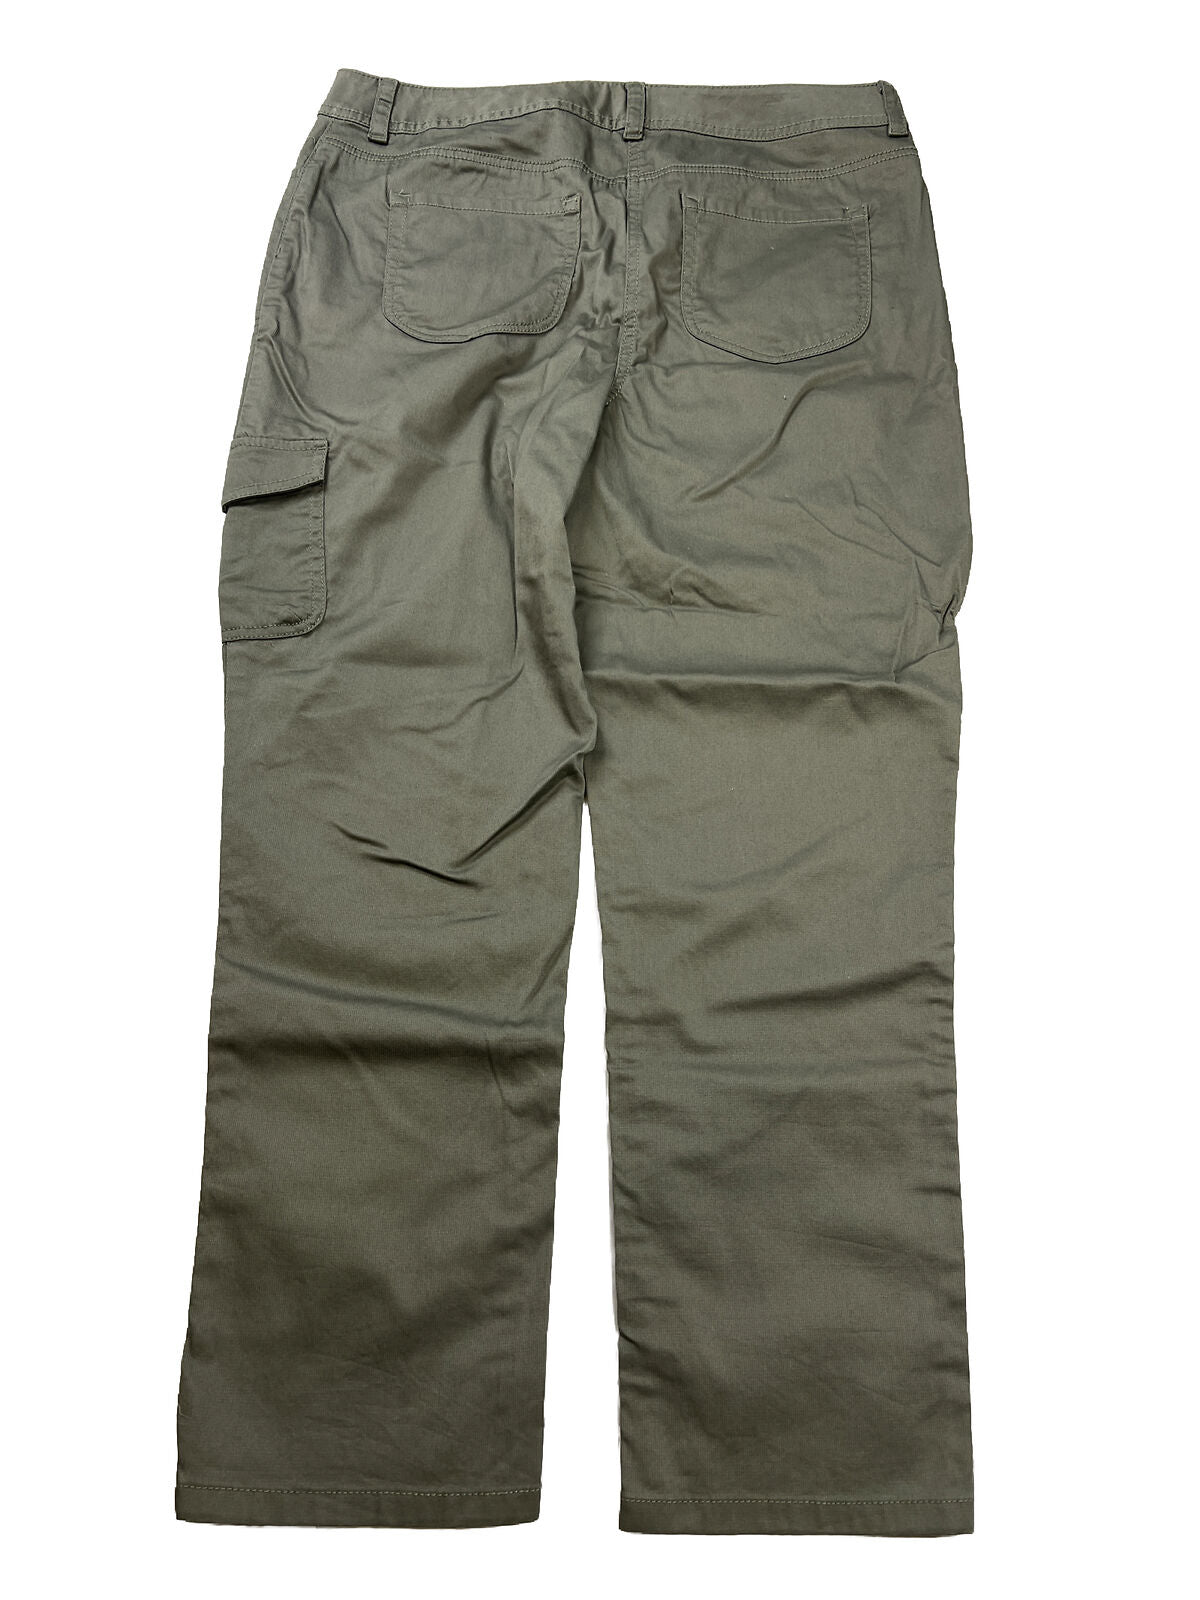 Chico's Women's Green Cargo Ankle Pants - 1/US 8